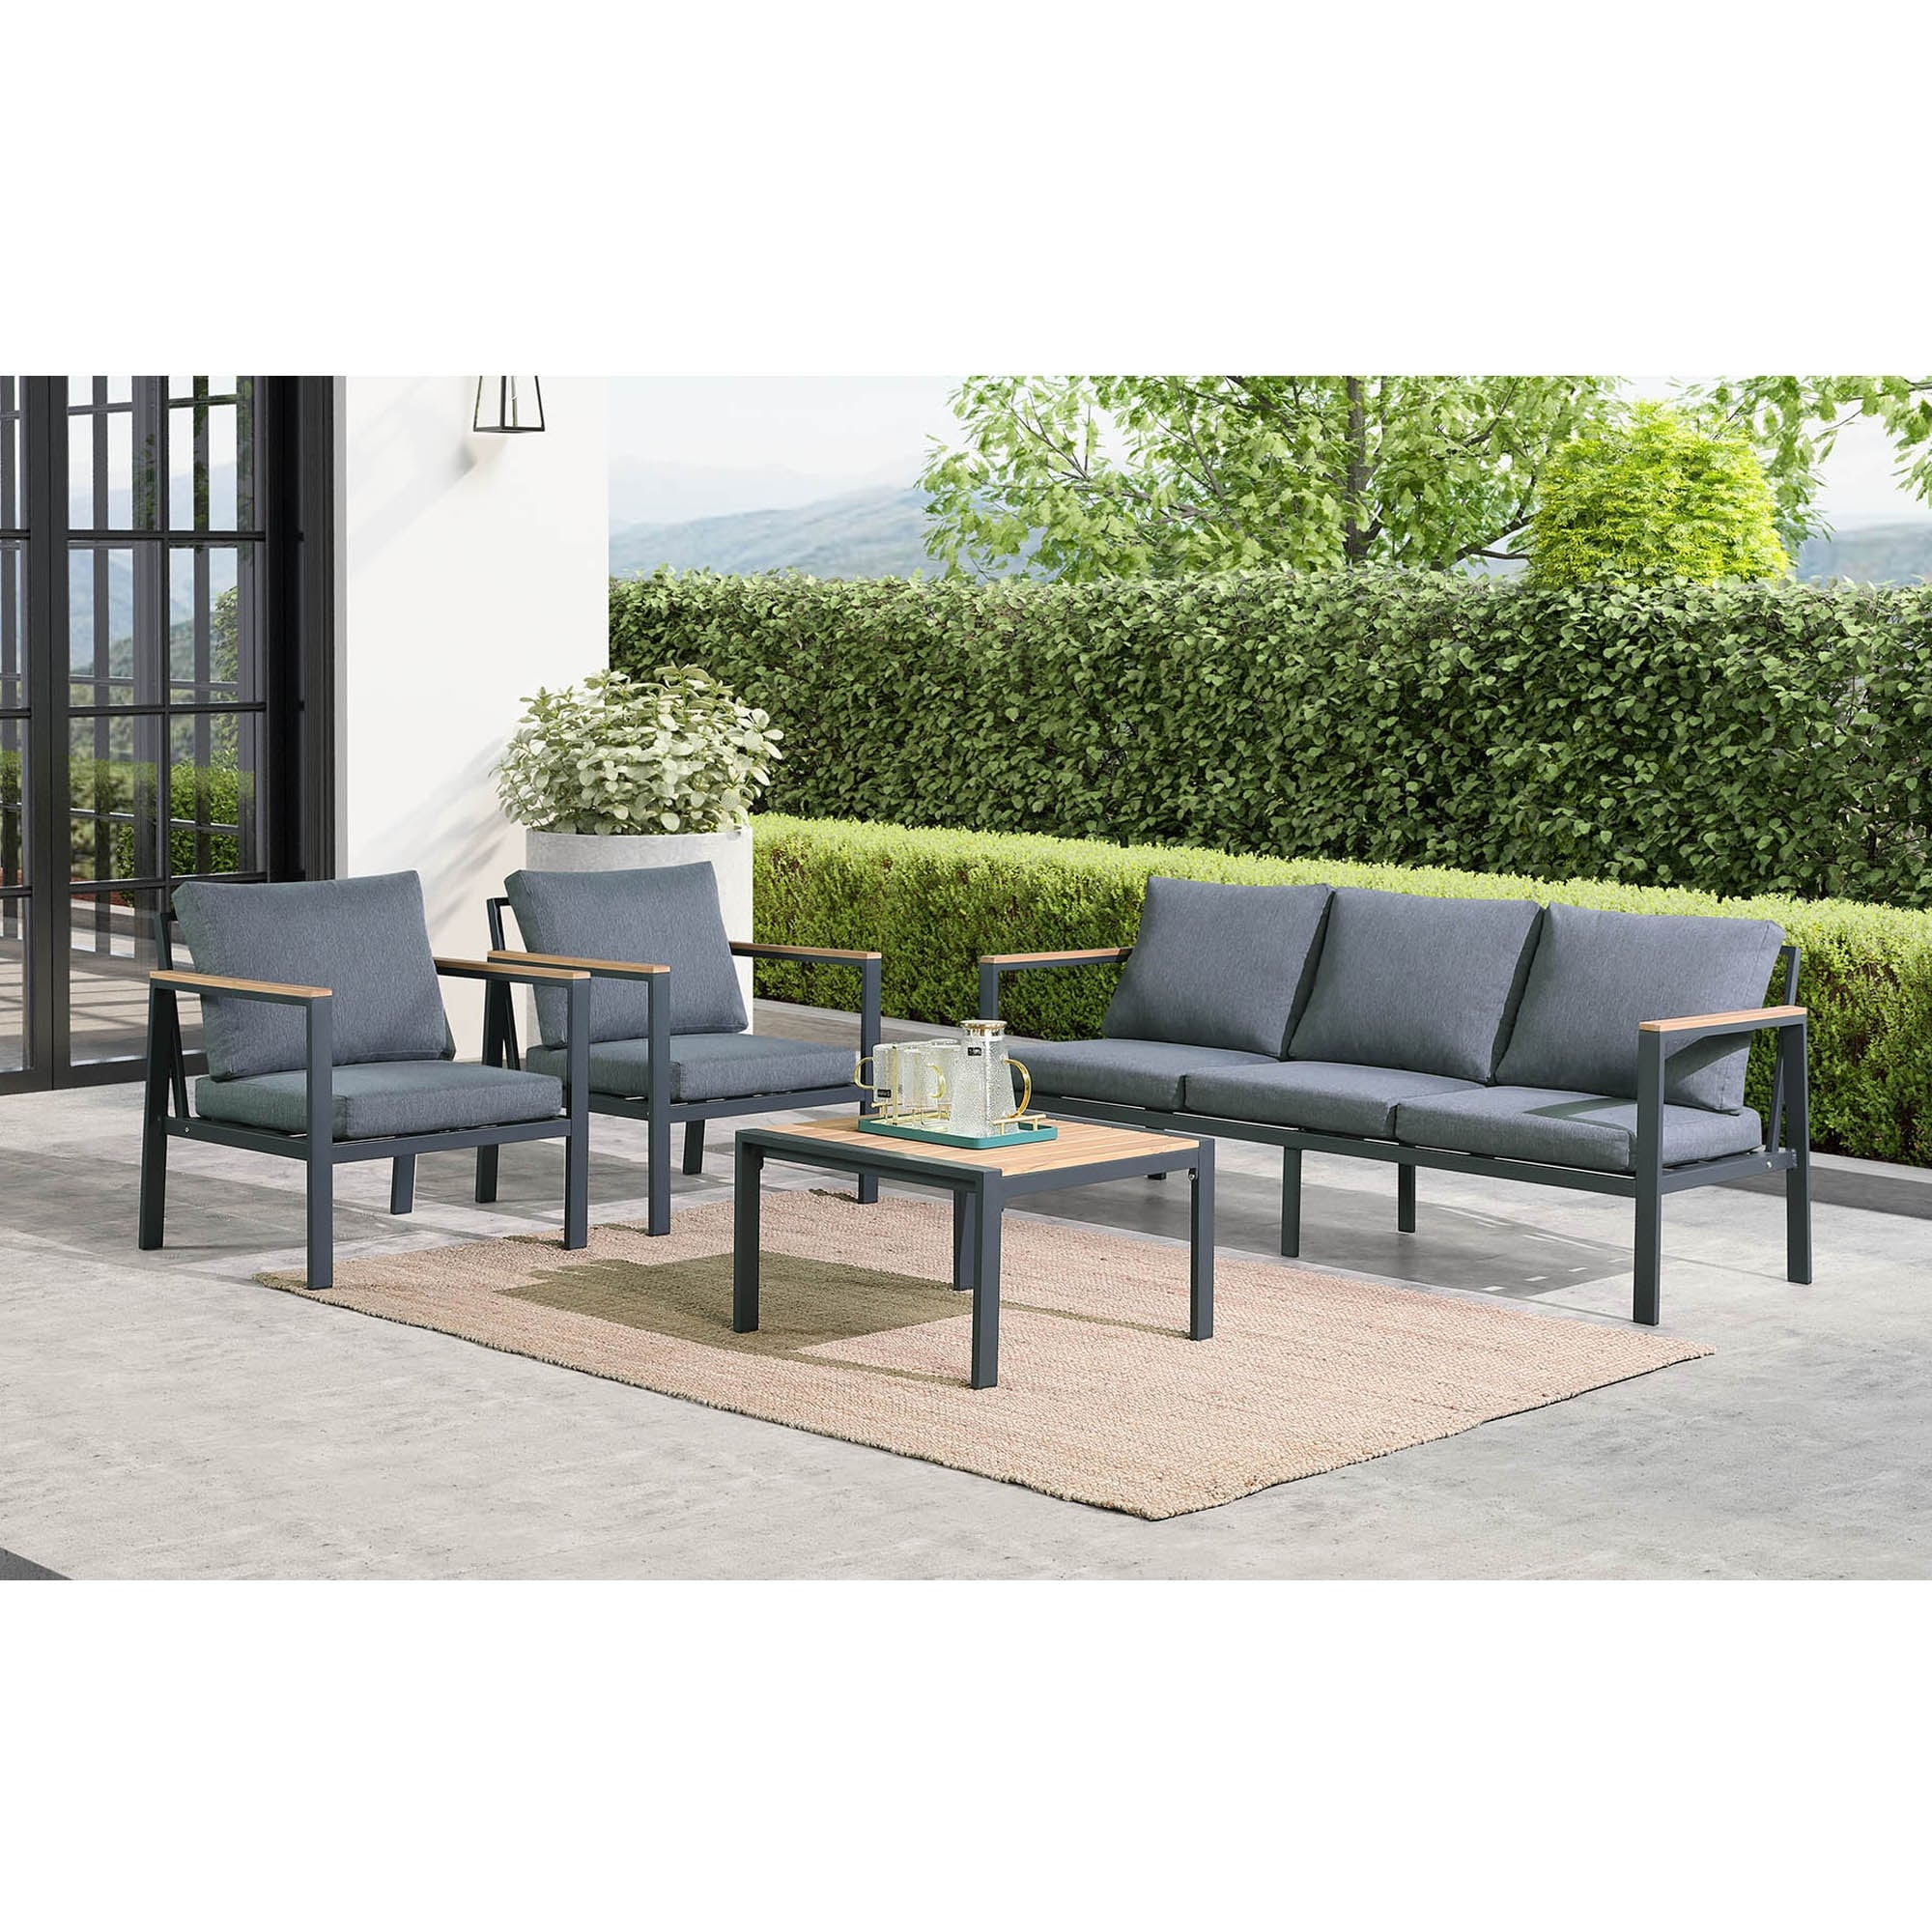 Rossio Outdoor 4 Piece Conversation Set matte Charcoal Aluminum Frame waterproof Fabric Cover With Slatted Teak Wood Top